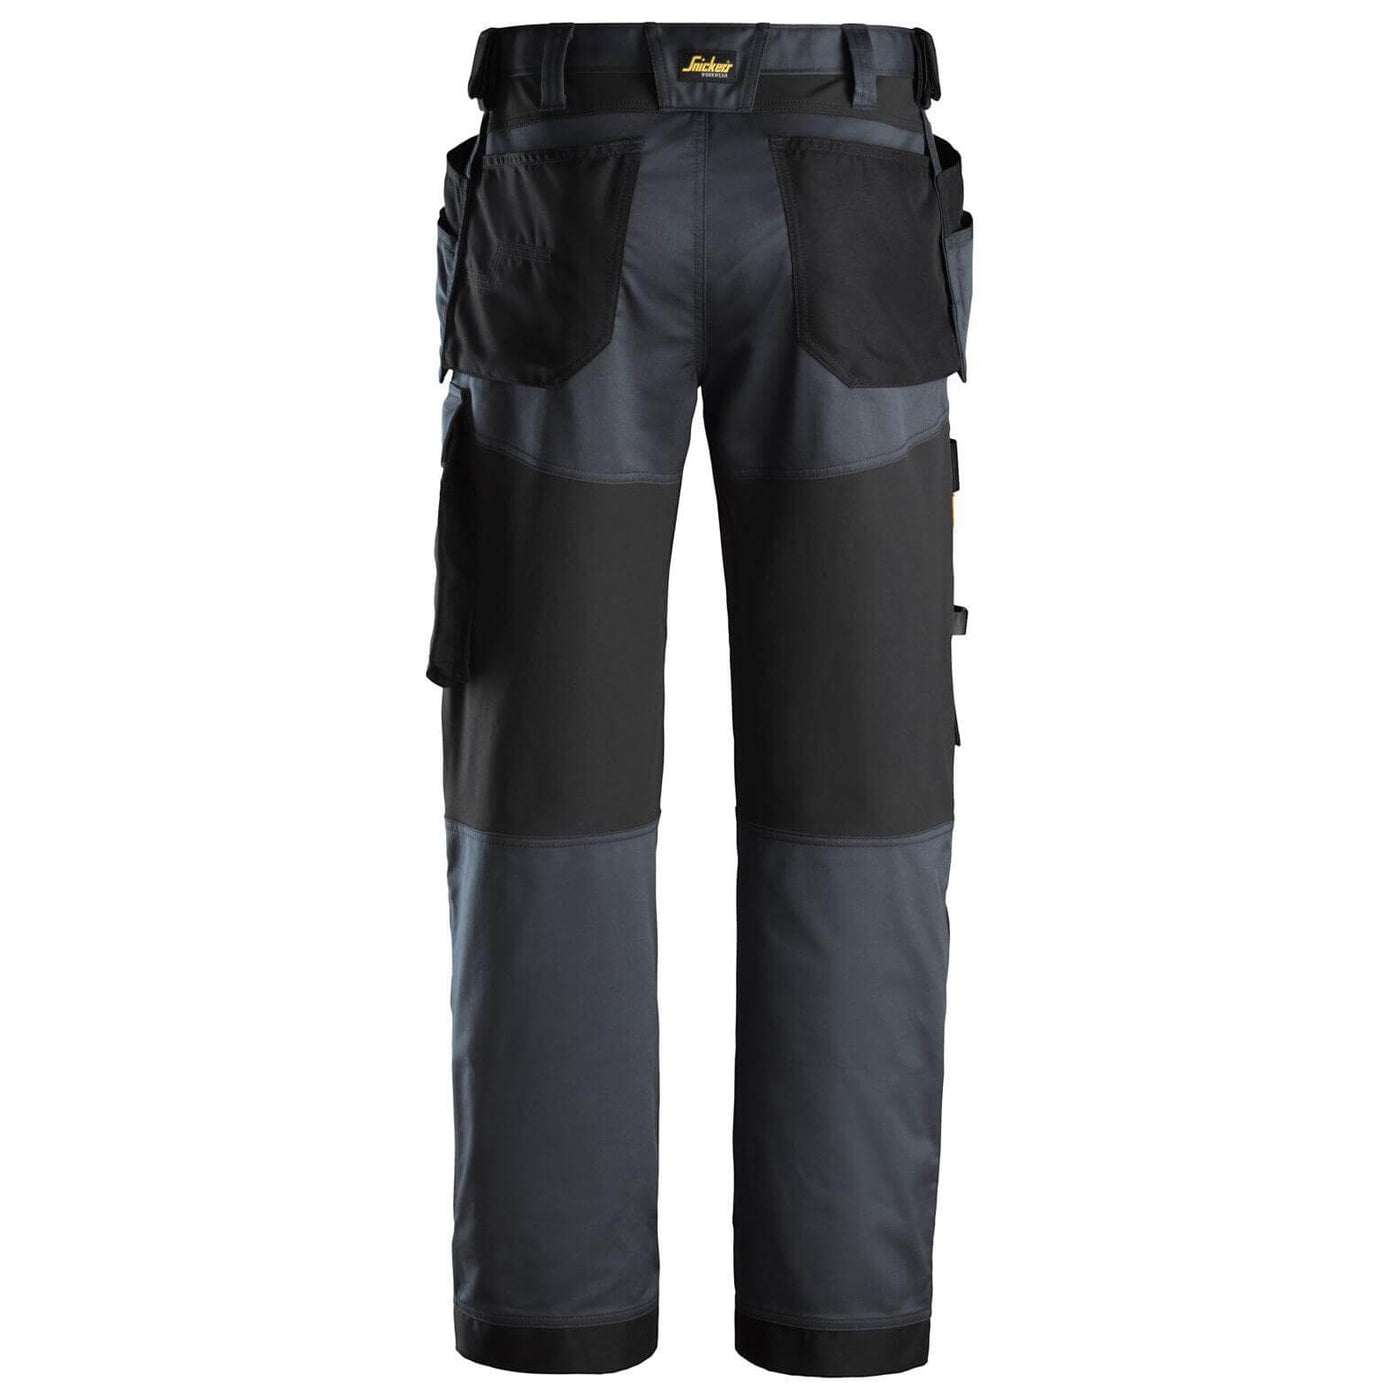 Snickers 6251 AllroundWork Stretch Loose fit Work Trousers with Holster Pockets Steel Grey Black back #colour_steel-grey-black